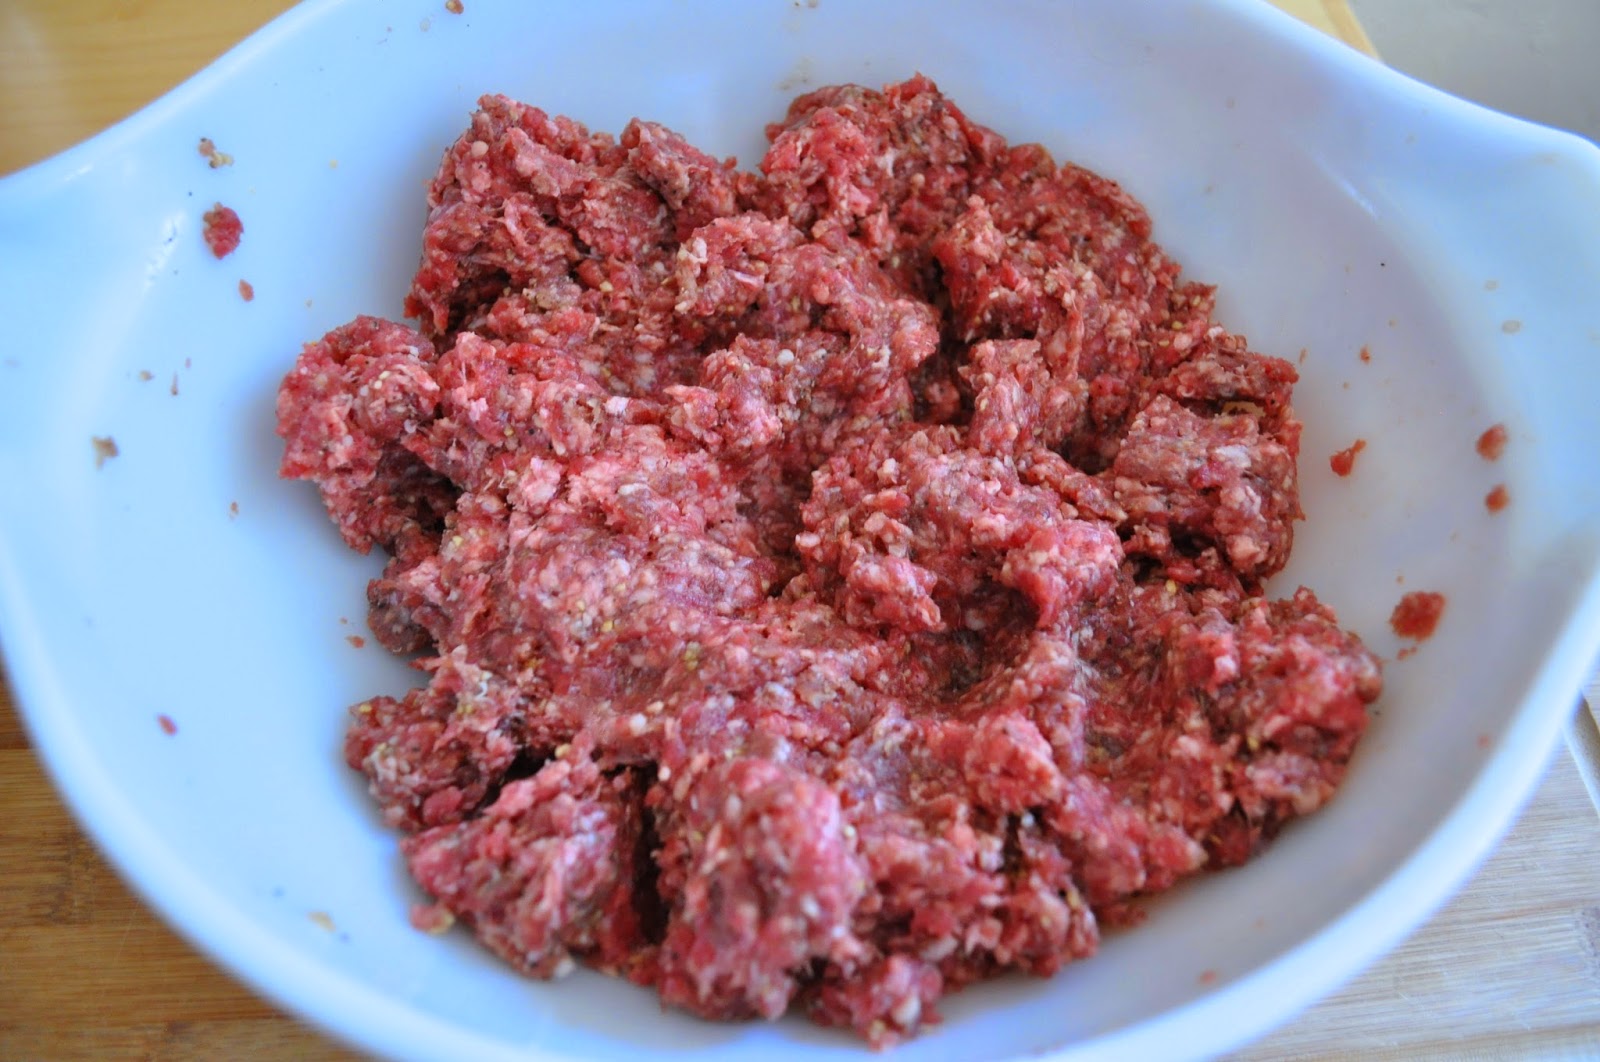 Are you looking for tasty jerky recipes to snack on? Ground Meat Jerky Recipes How To Make Ground Beef Jerky Low Carb Yum That Alone Saves Hours Since You Don T Have To Wait For The Marinade To Soak Into